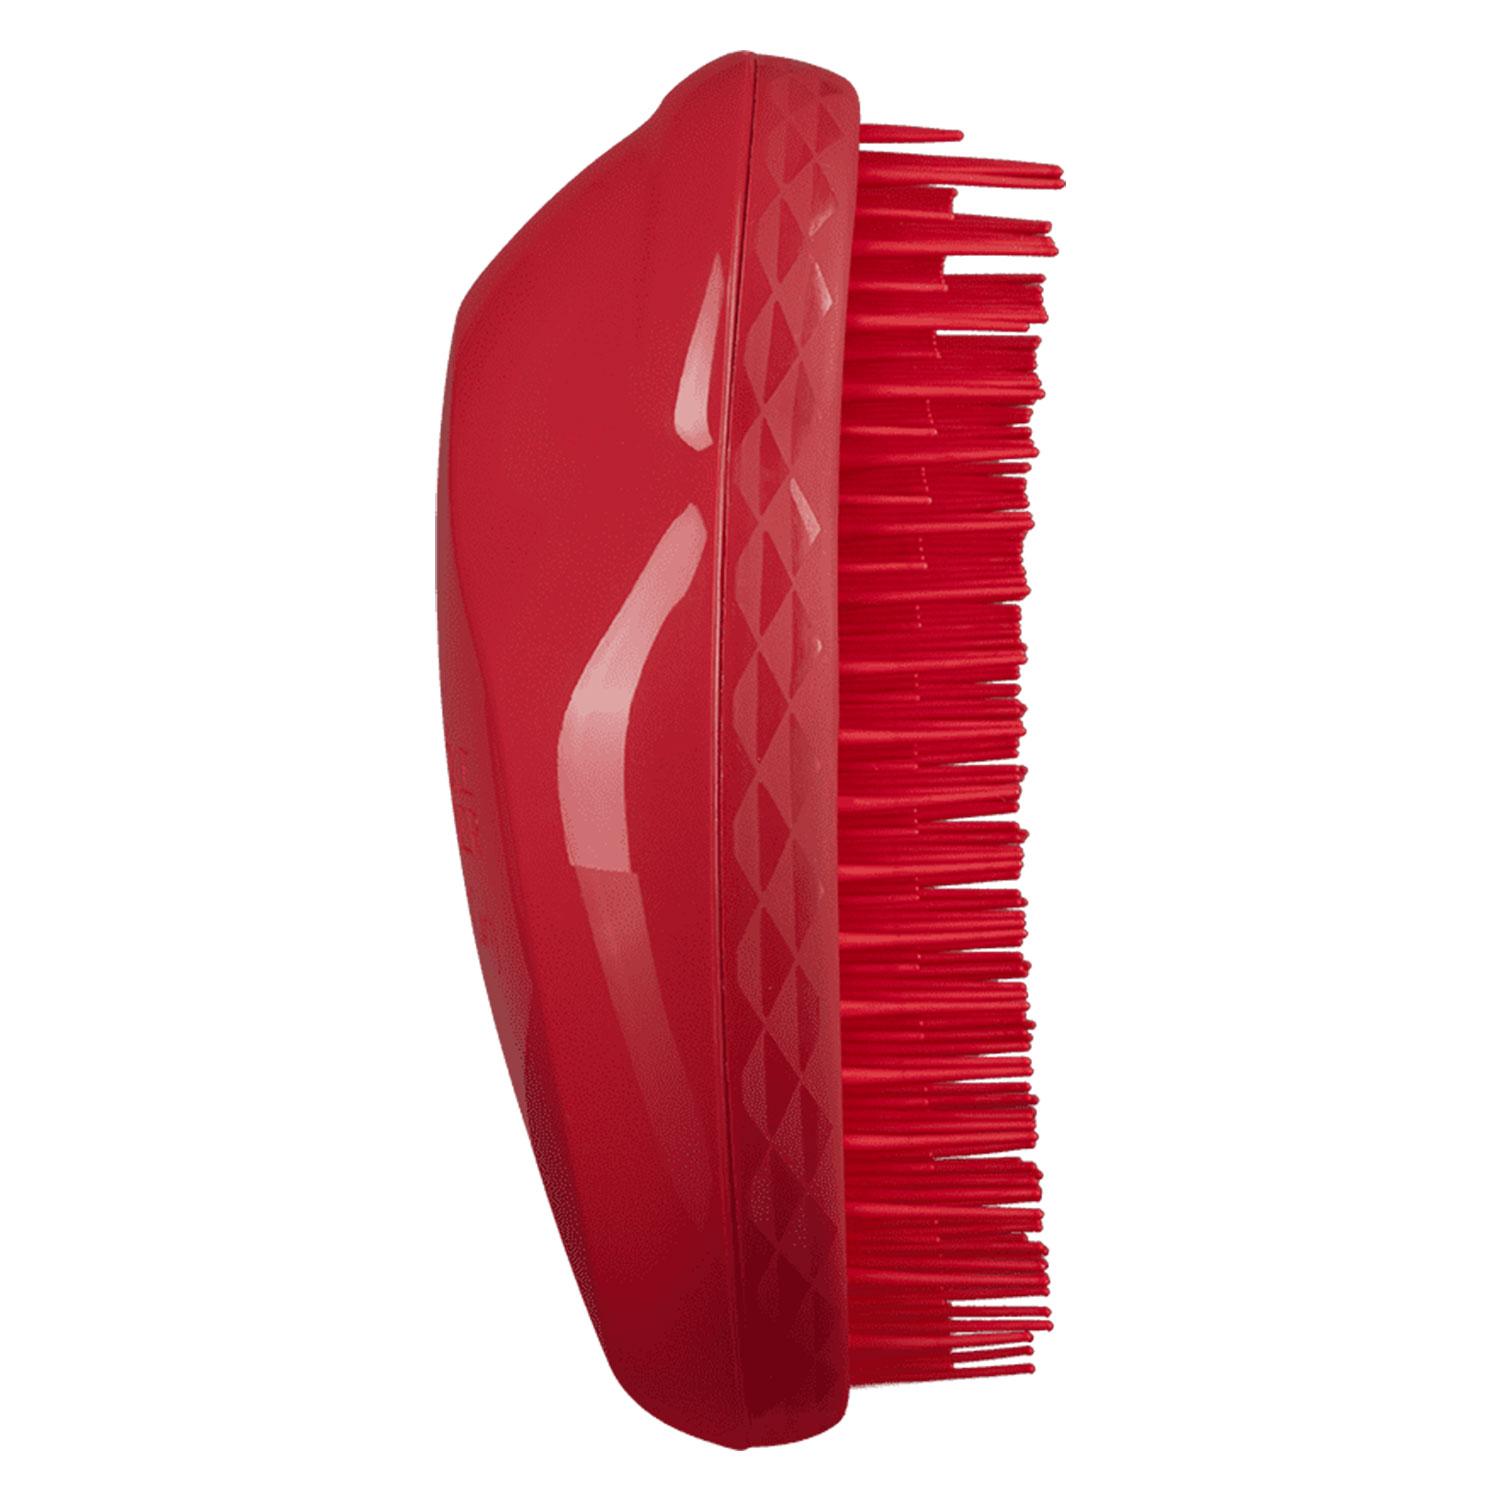 Tangle Teezer - Thick & Curly Salsa Red